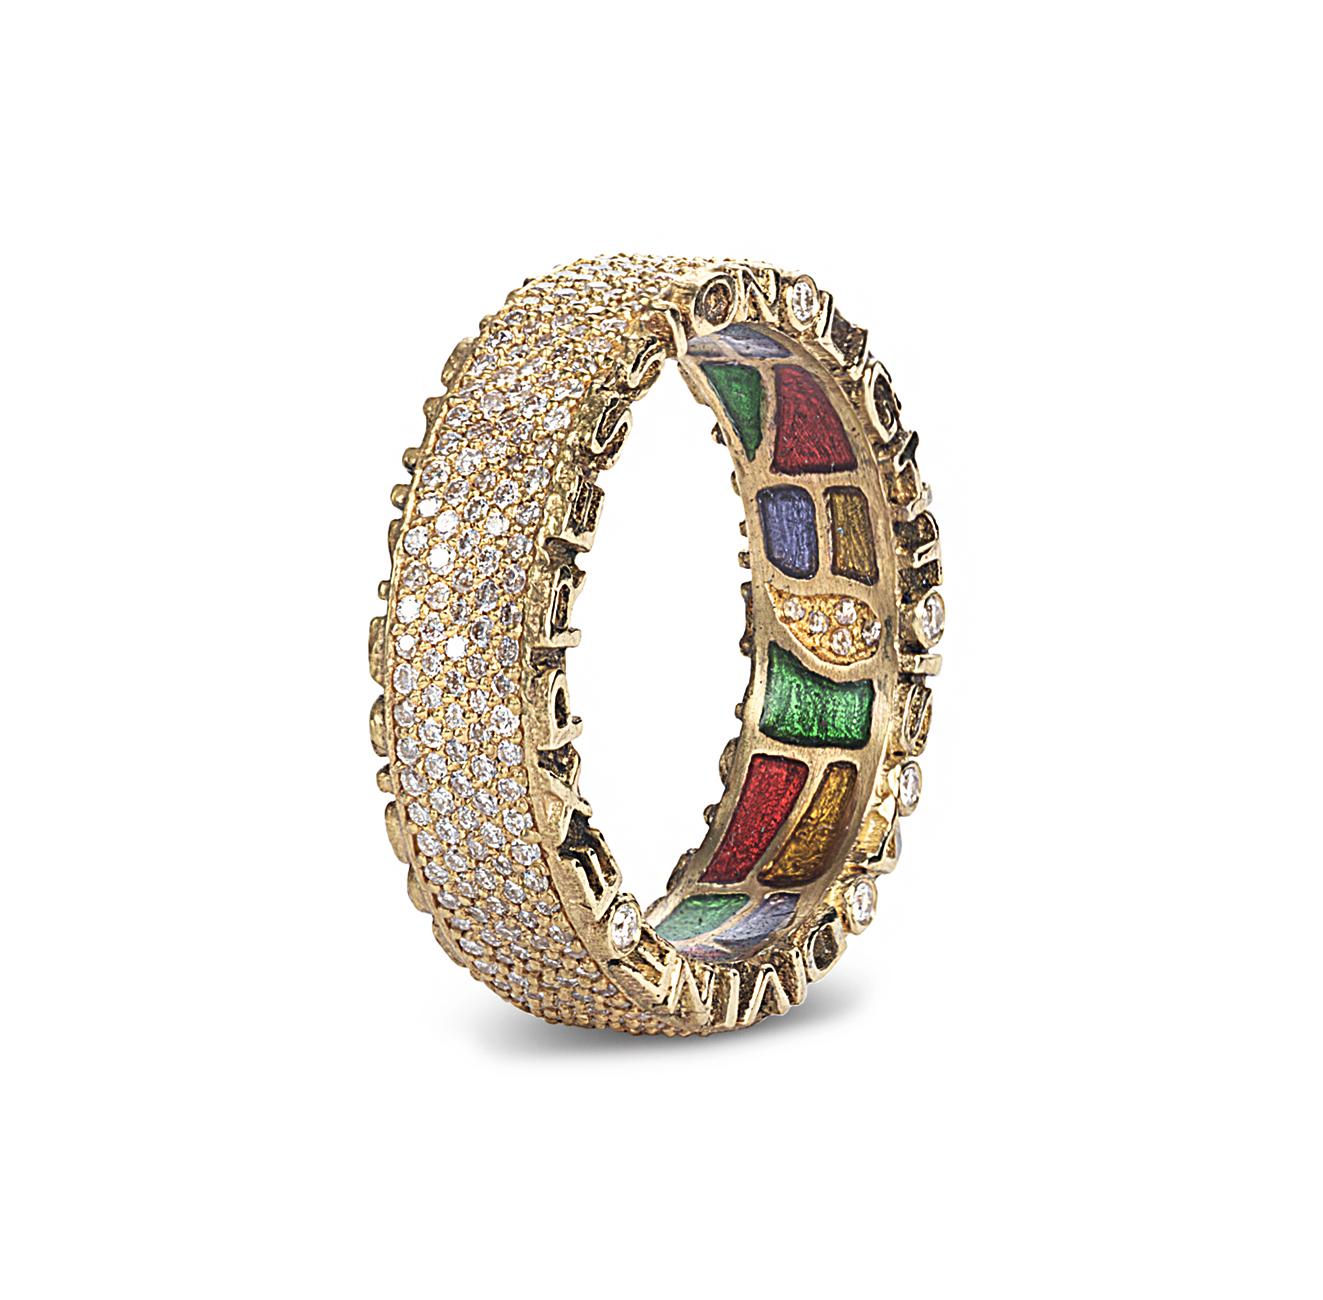 Hand made Coomi Sagrada collection band ring set in 20K yellow gold with 1.12cts diamonds. Text reads 